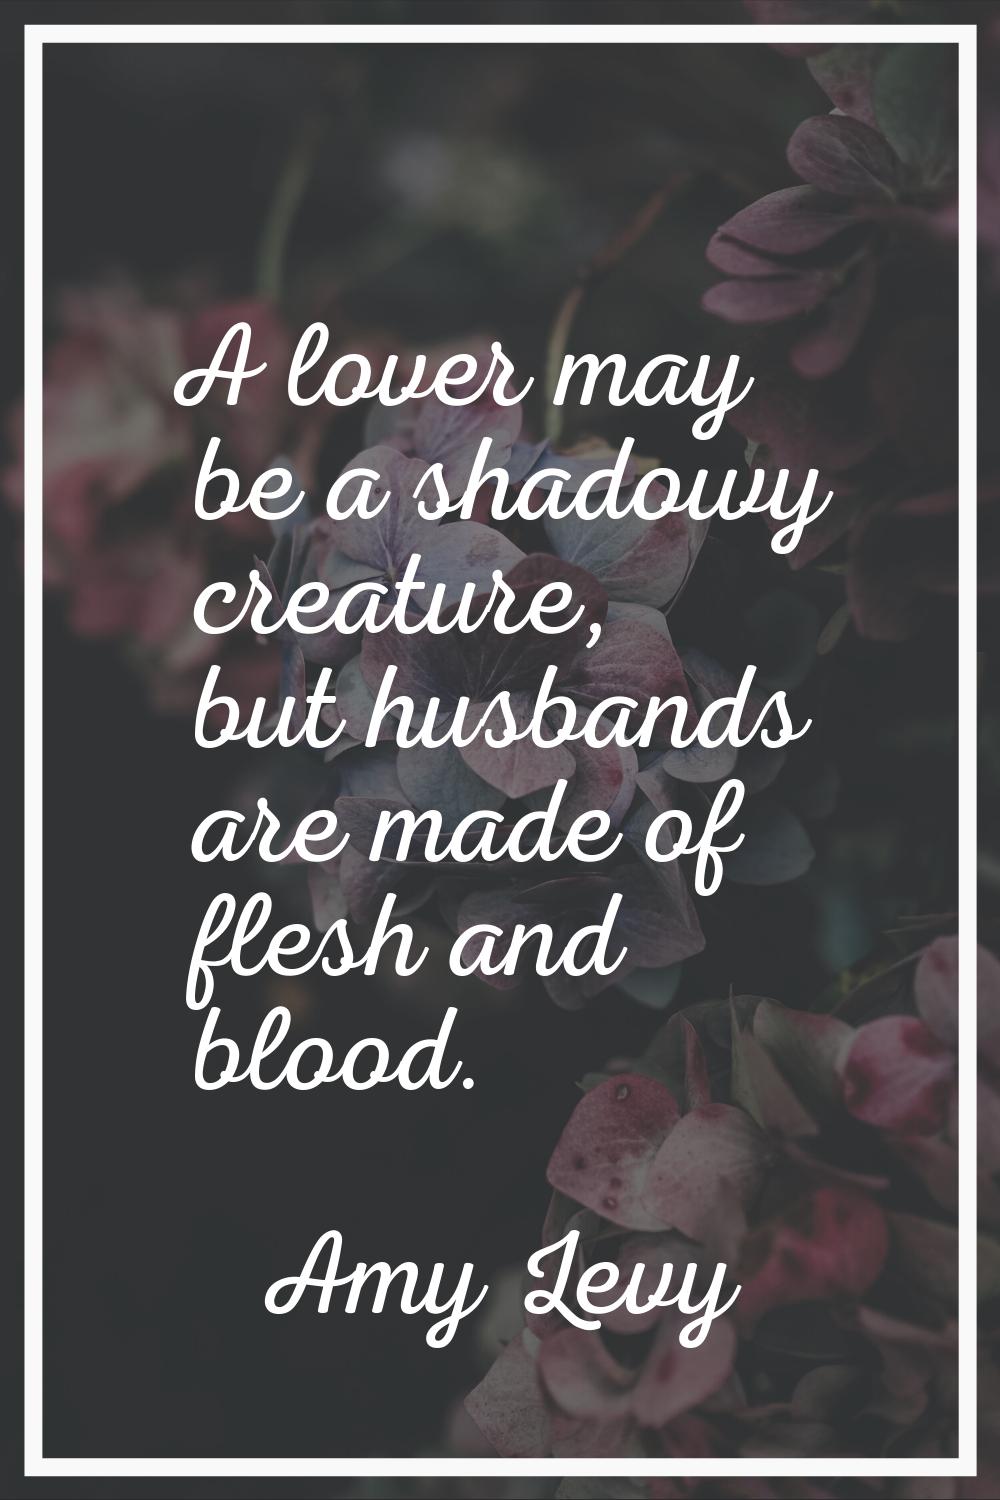 A lover may be a shadowy creature, but husbands are made of flesh and blood.